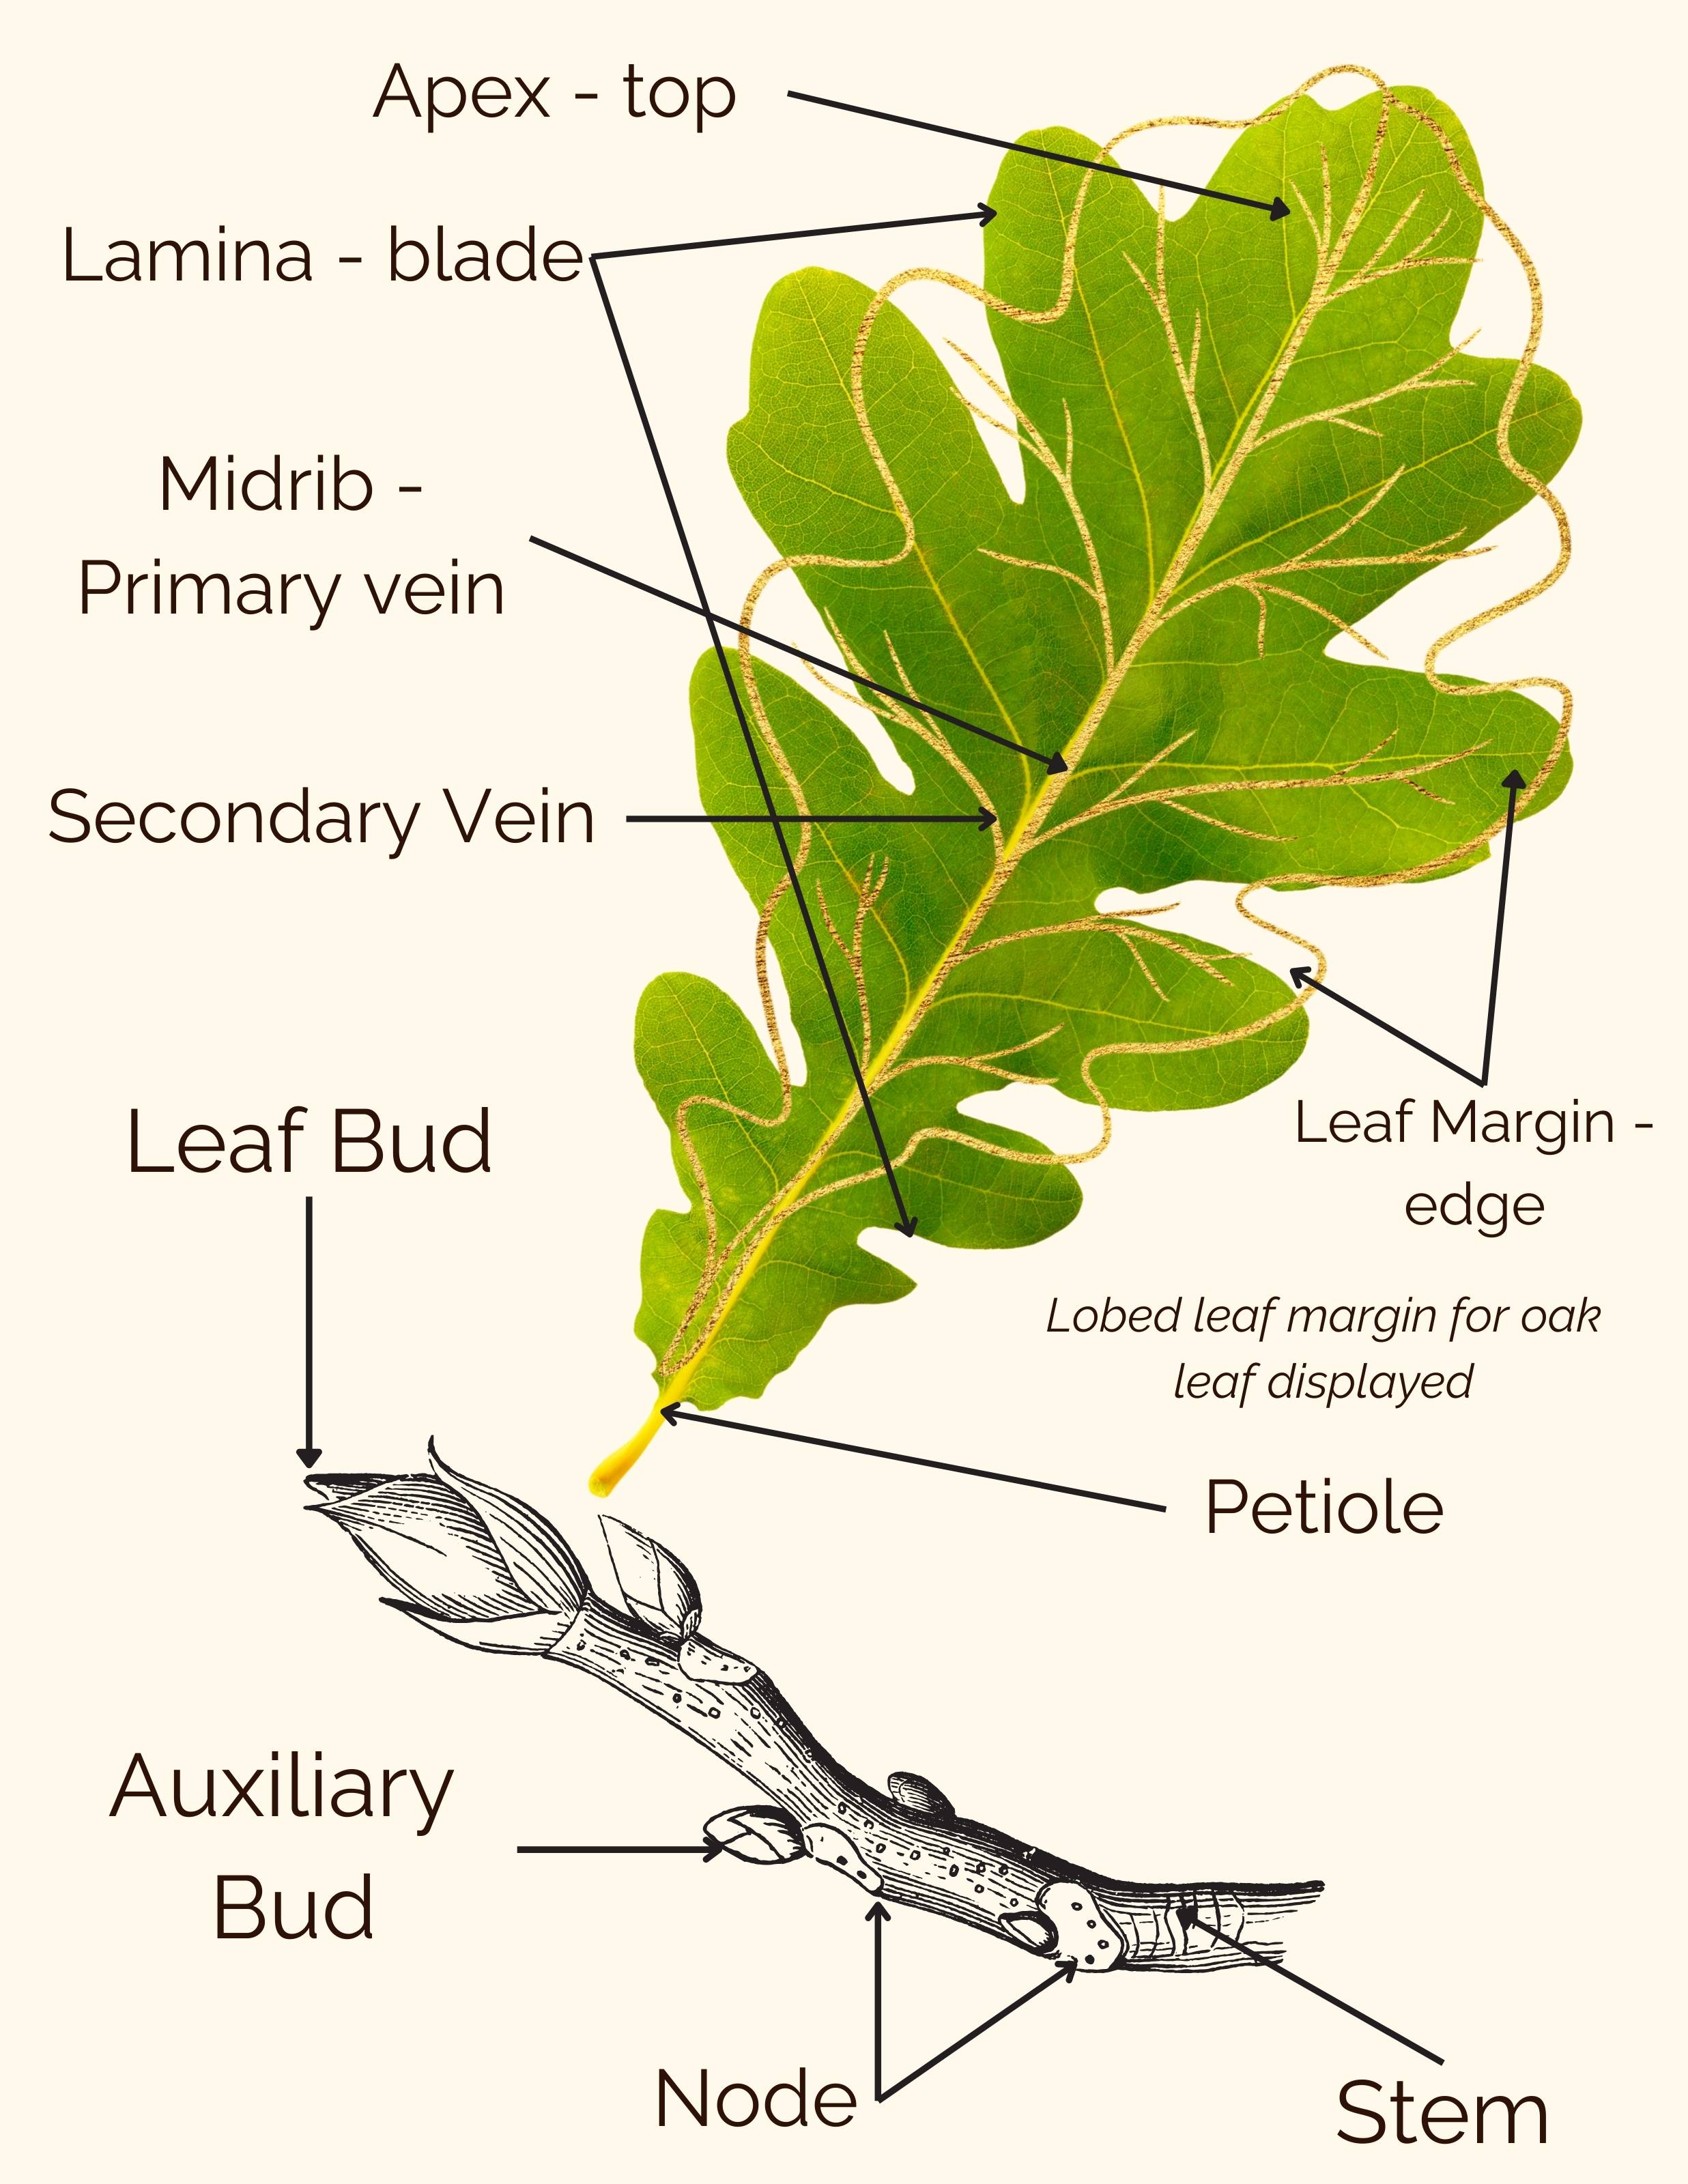 Color illustration of a lobed leaf from an oak, featuring detailed definitions for parts such as lamina, midrib, primary vein, secondary vein, leaf margin, petiole, and stem. 
                Refer to the glossary for detailed definitions.